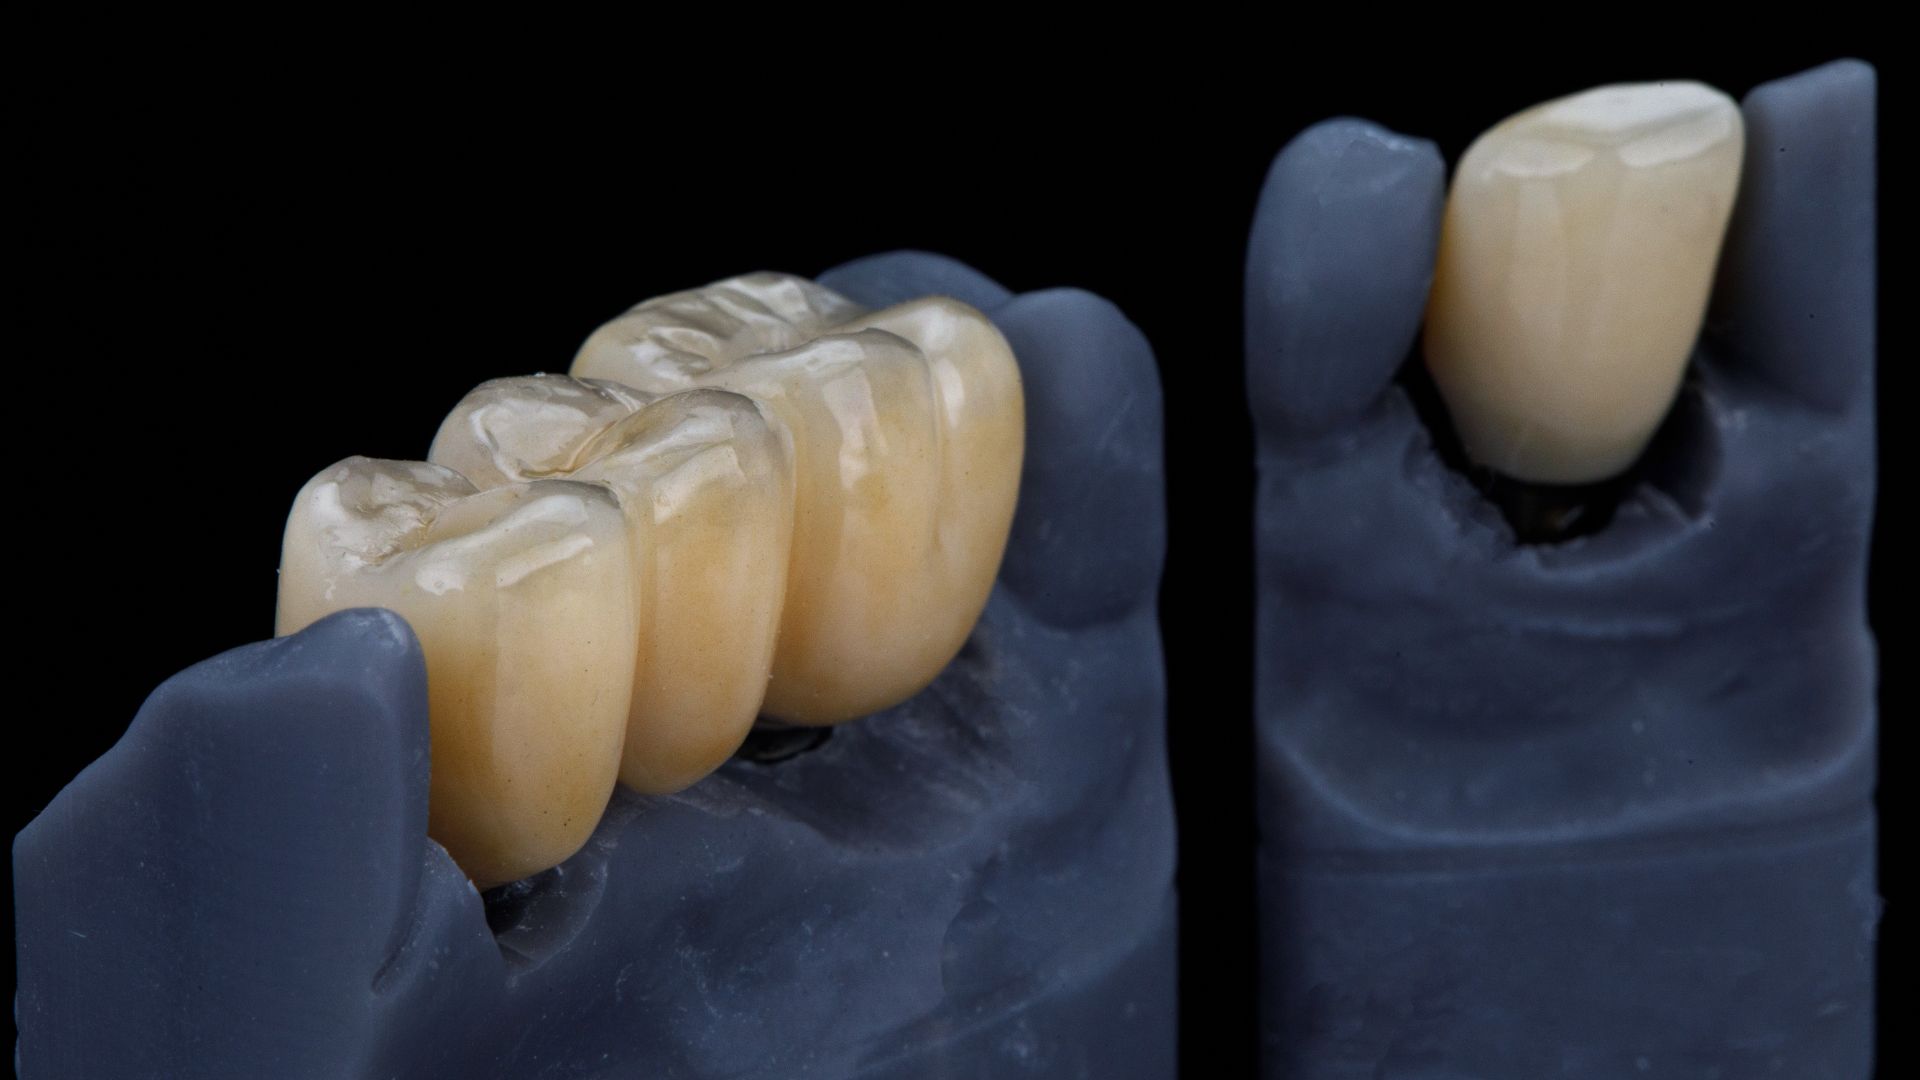 What is the difference of zirconia crown from other crowns?